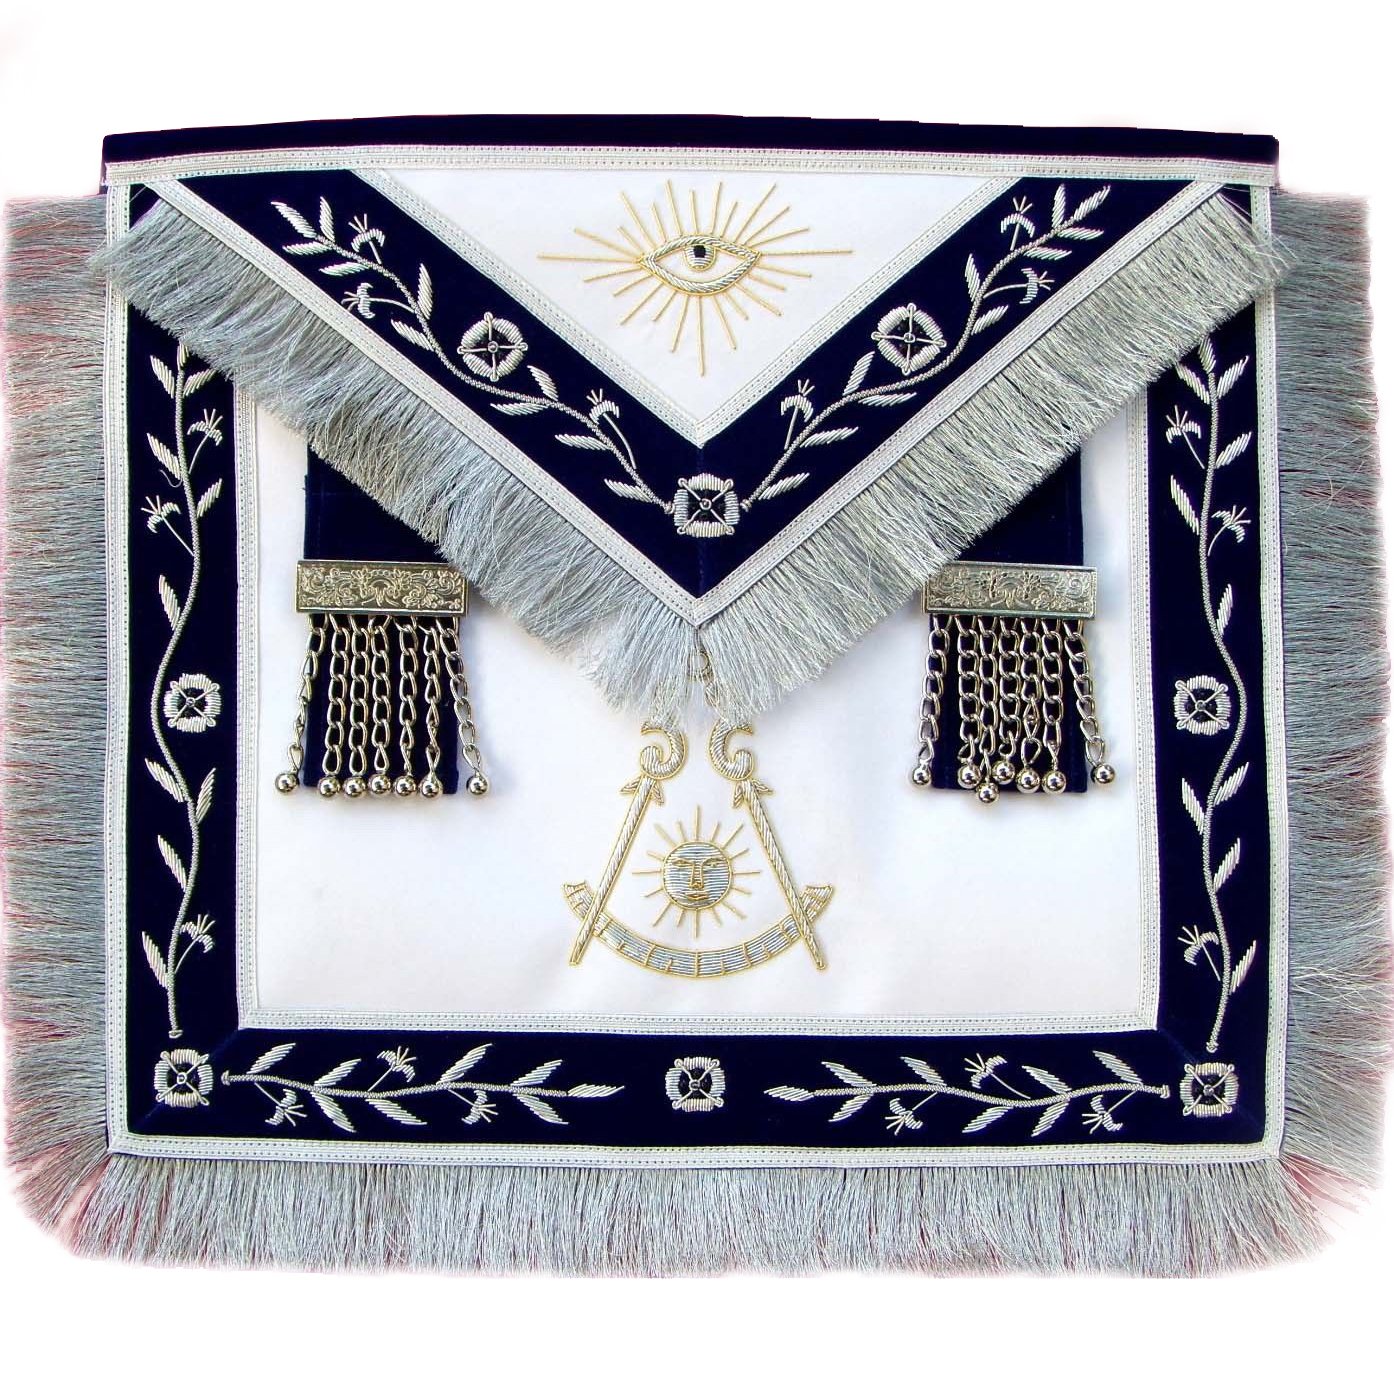 Past Master Blue Lodge Apron - Navy Blue with Silver Fringe Tassels Hand Embroidery - Bricks Masons